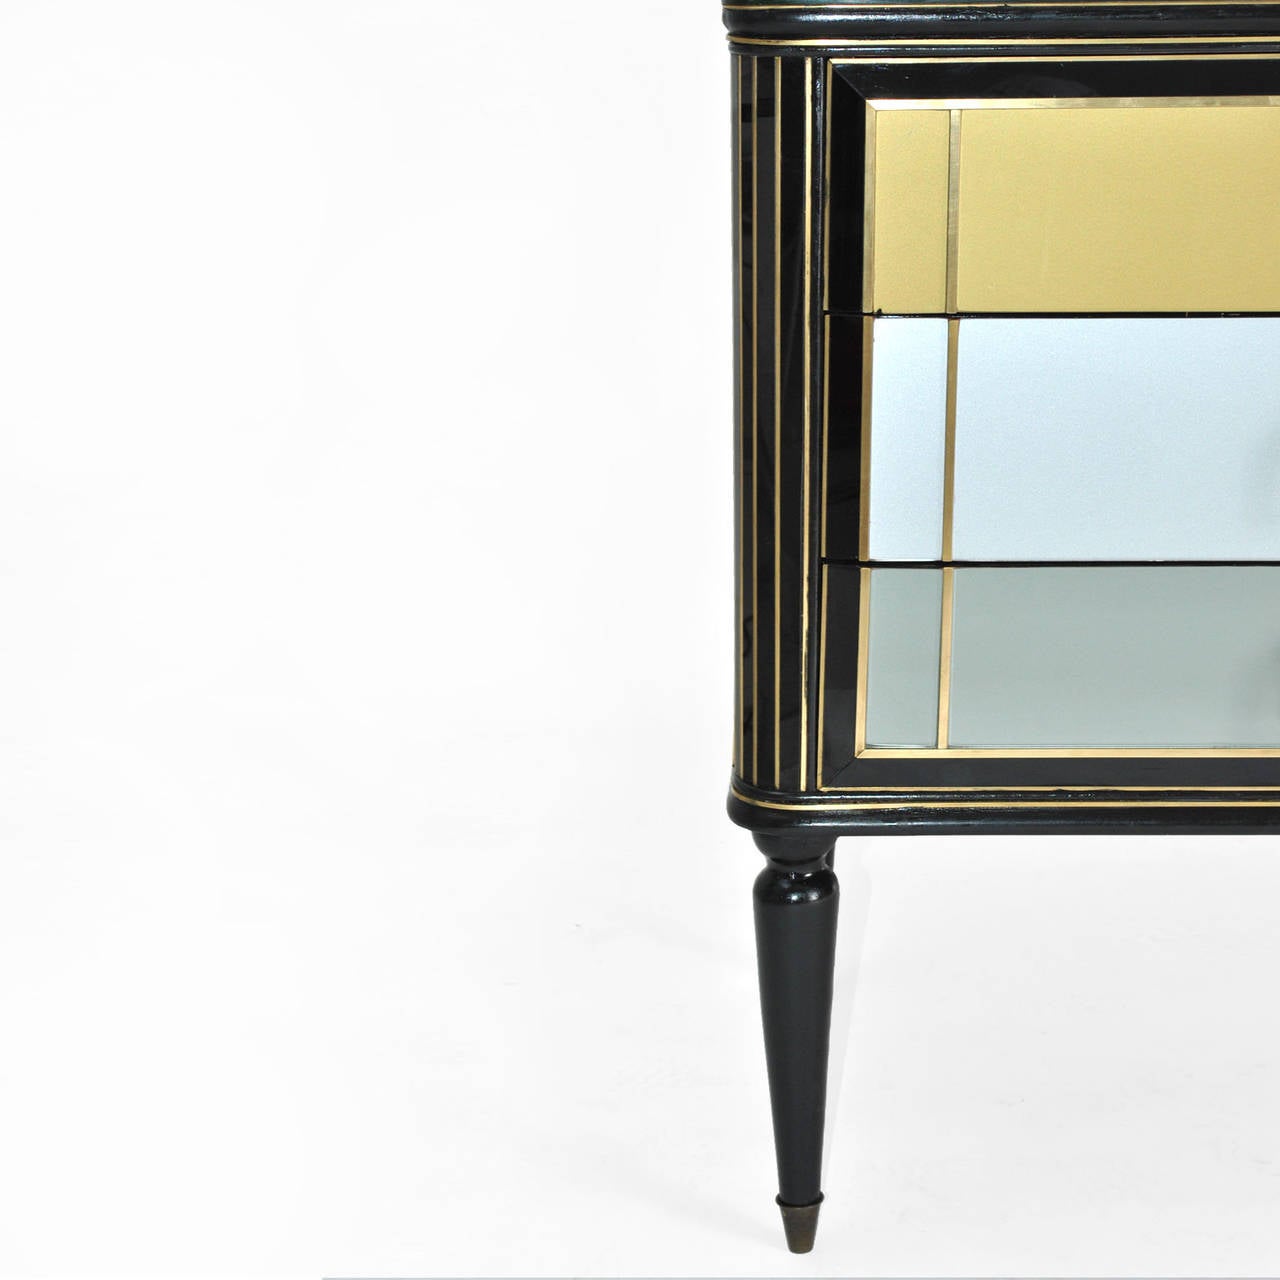 Commode composed by six drawers, made in solid wood, covered in Murano Glass in different colors, finished in brass and legged in black lacquer turning form.